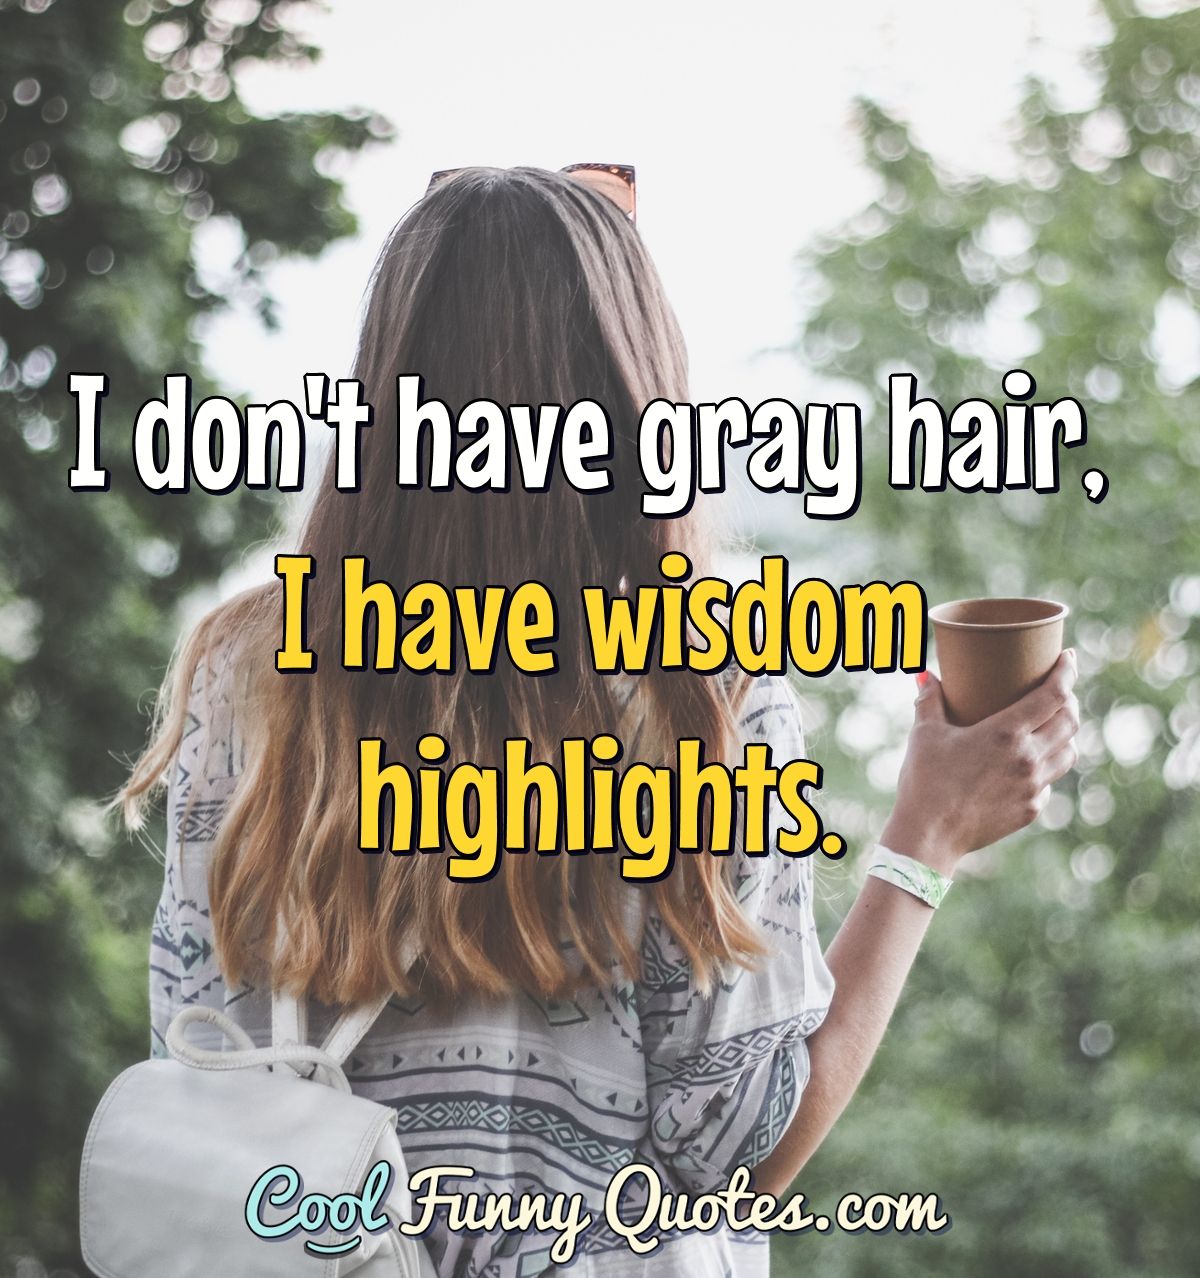 I don't have gray hair, I have wisdom highlights.